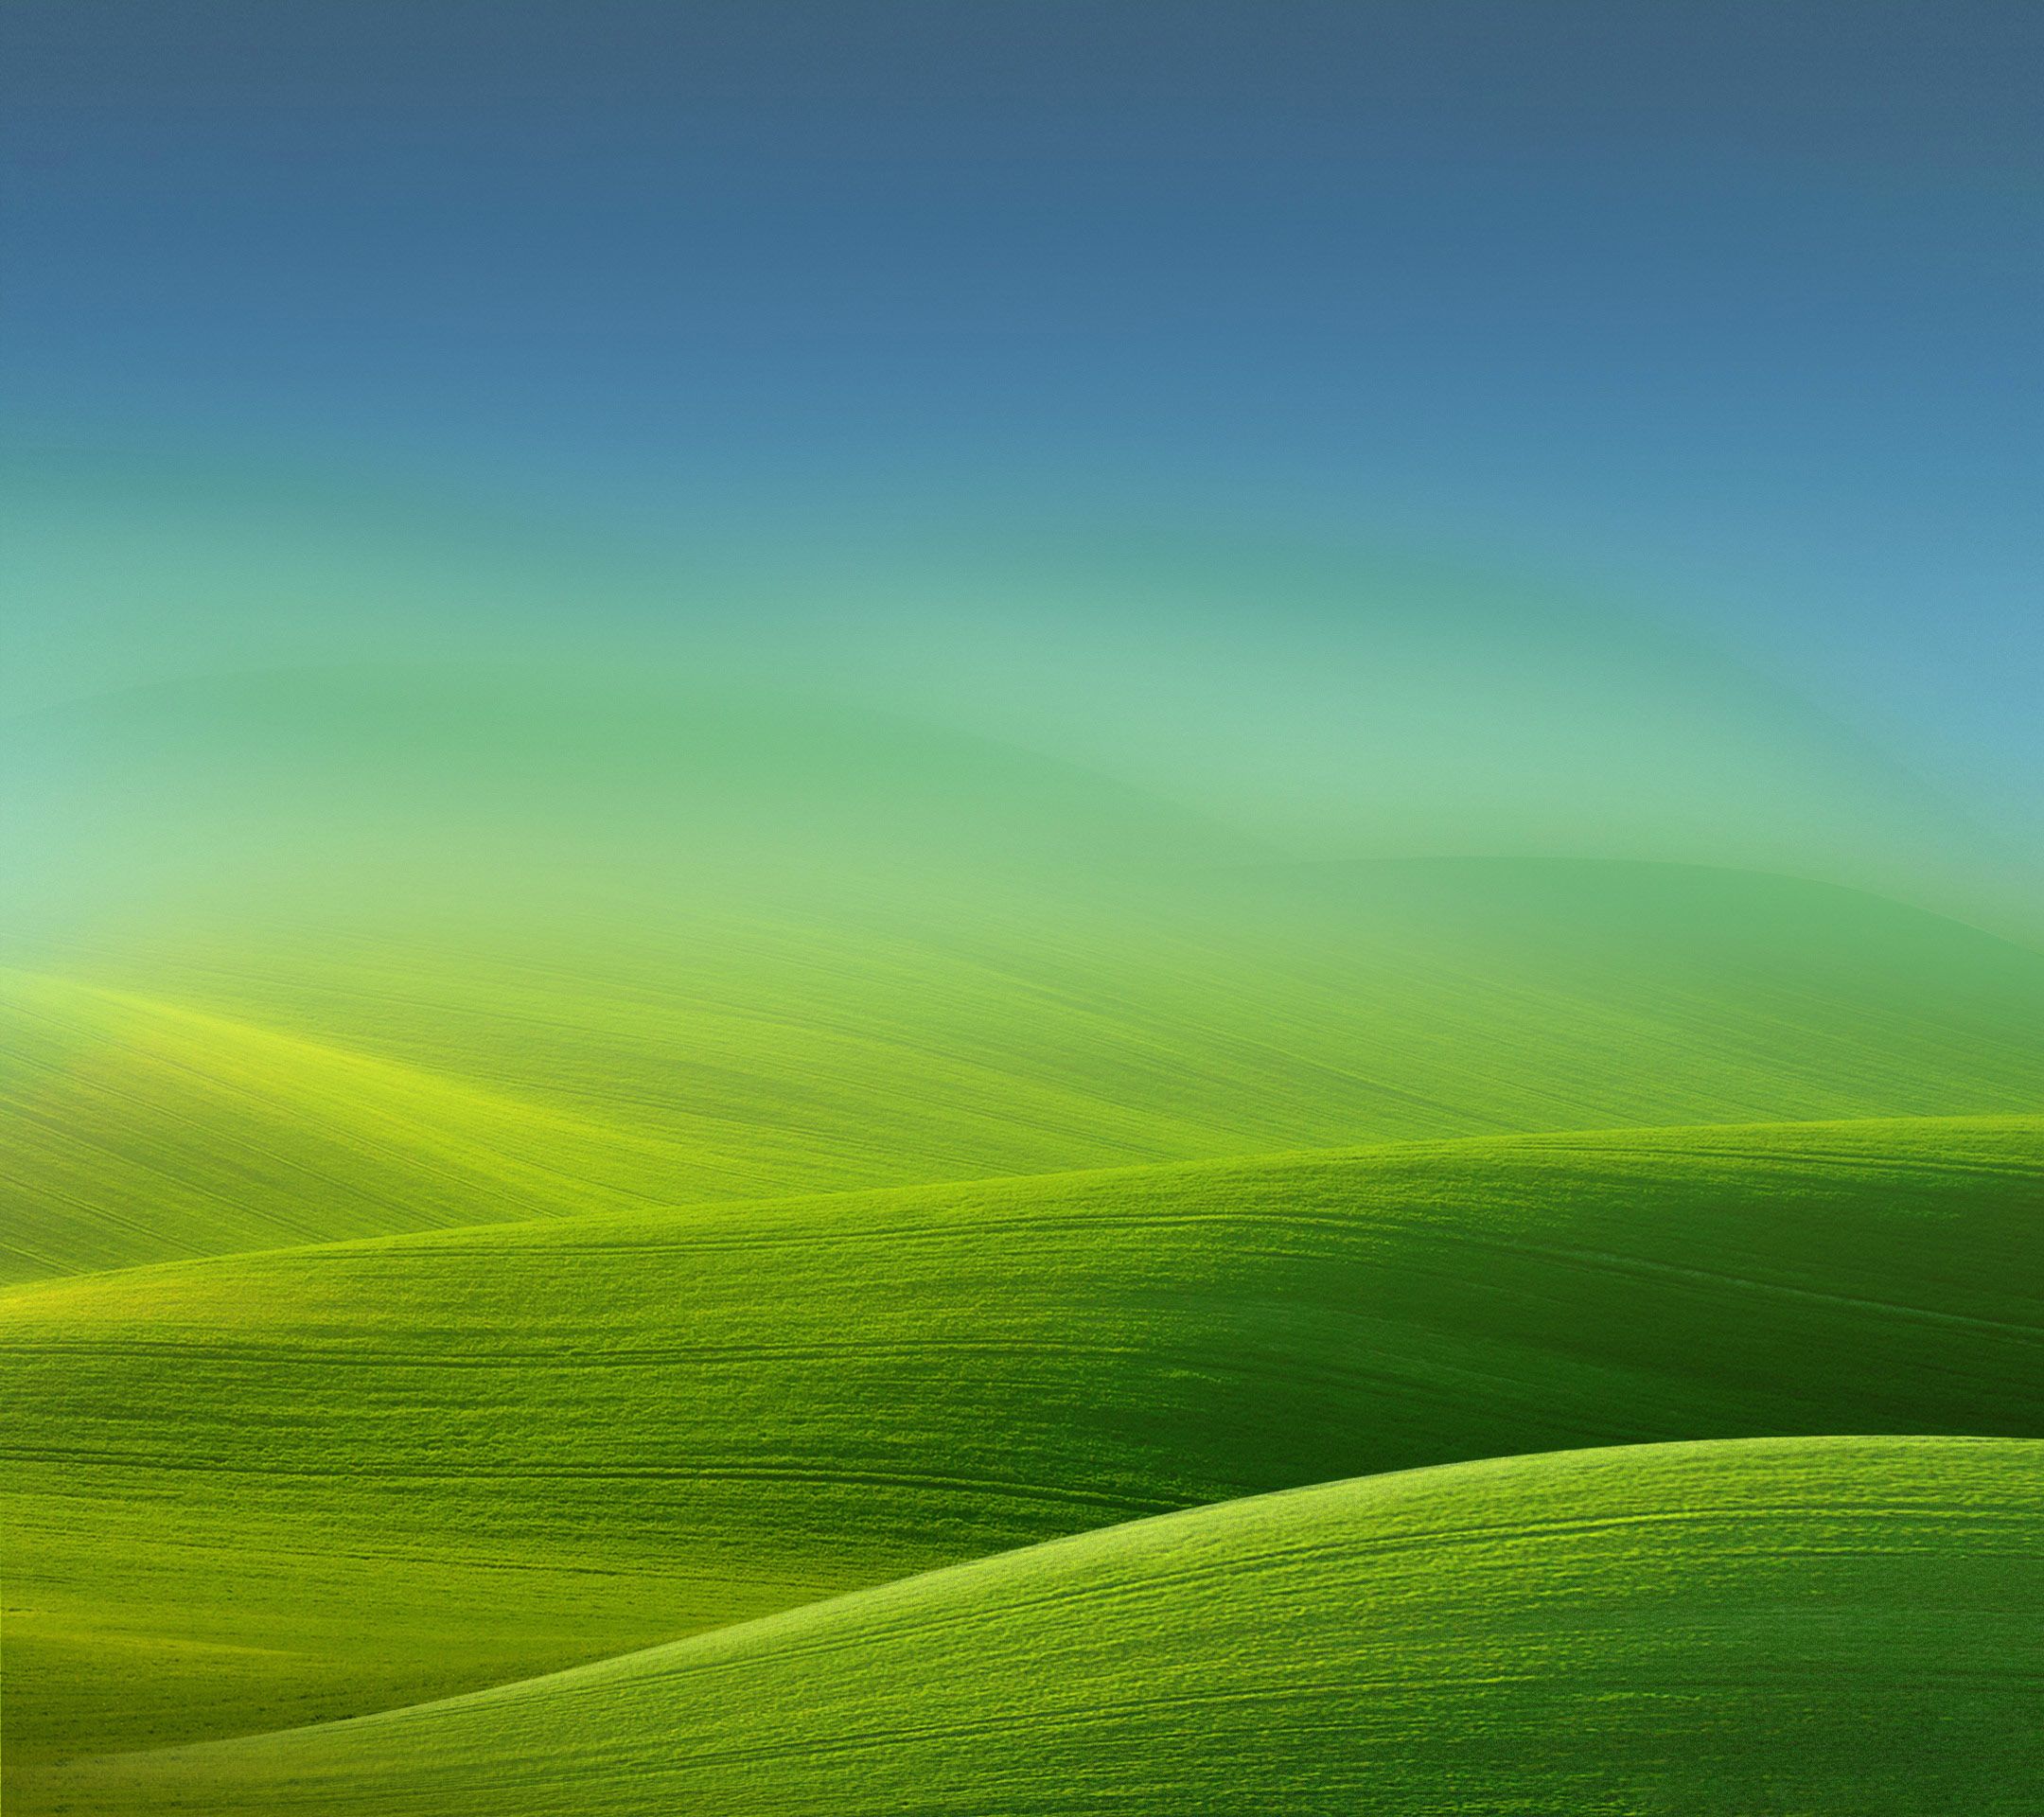 WALLPAPERS] All MIUI V6 Wallpapers + Locksc… | Android Development ...